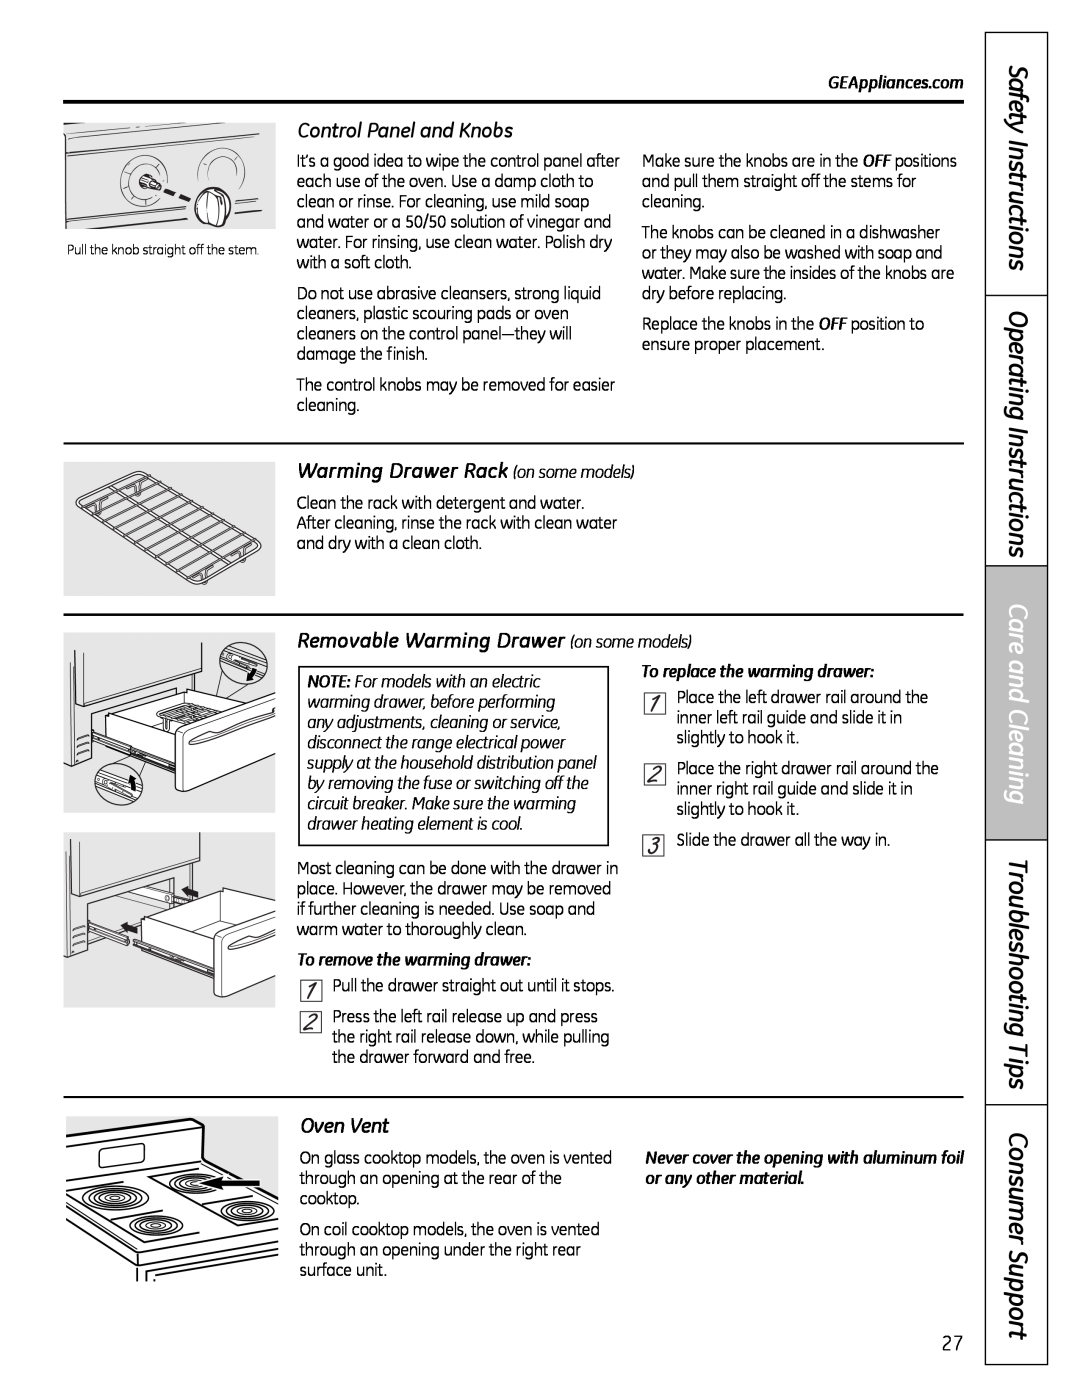 Hotpoint RB525 Instructions Operating, Instructions Care, Tips, Consumer Support, and Cleaning Troubleshooting, Oven Vent 